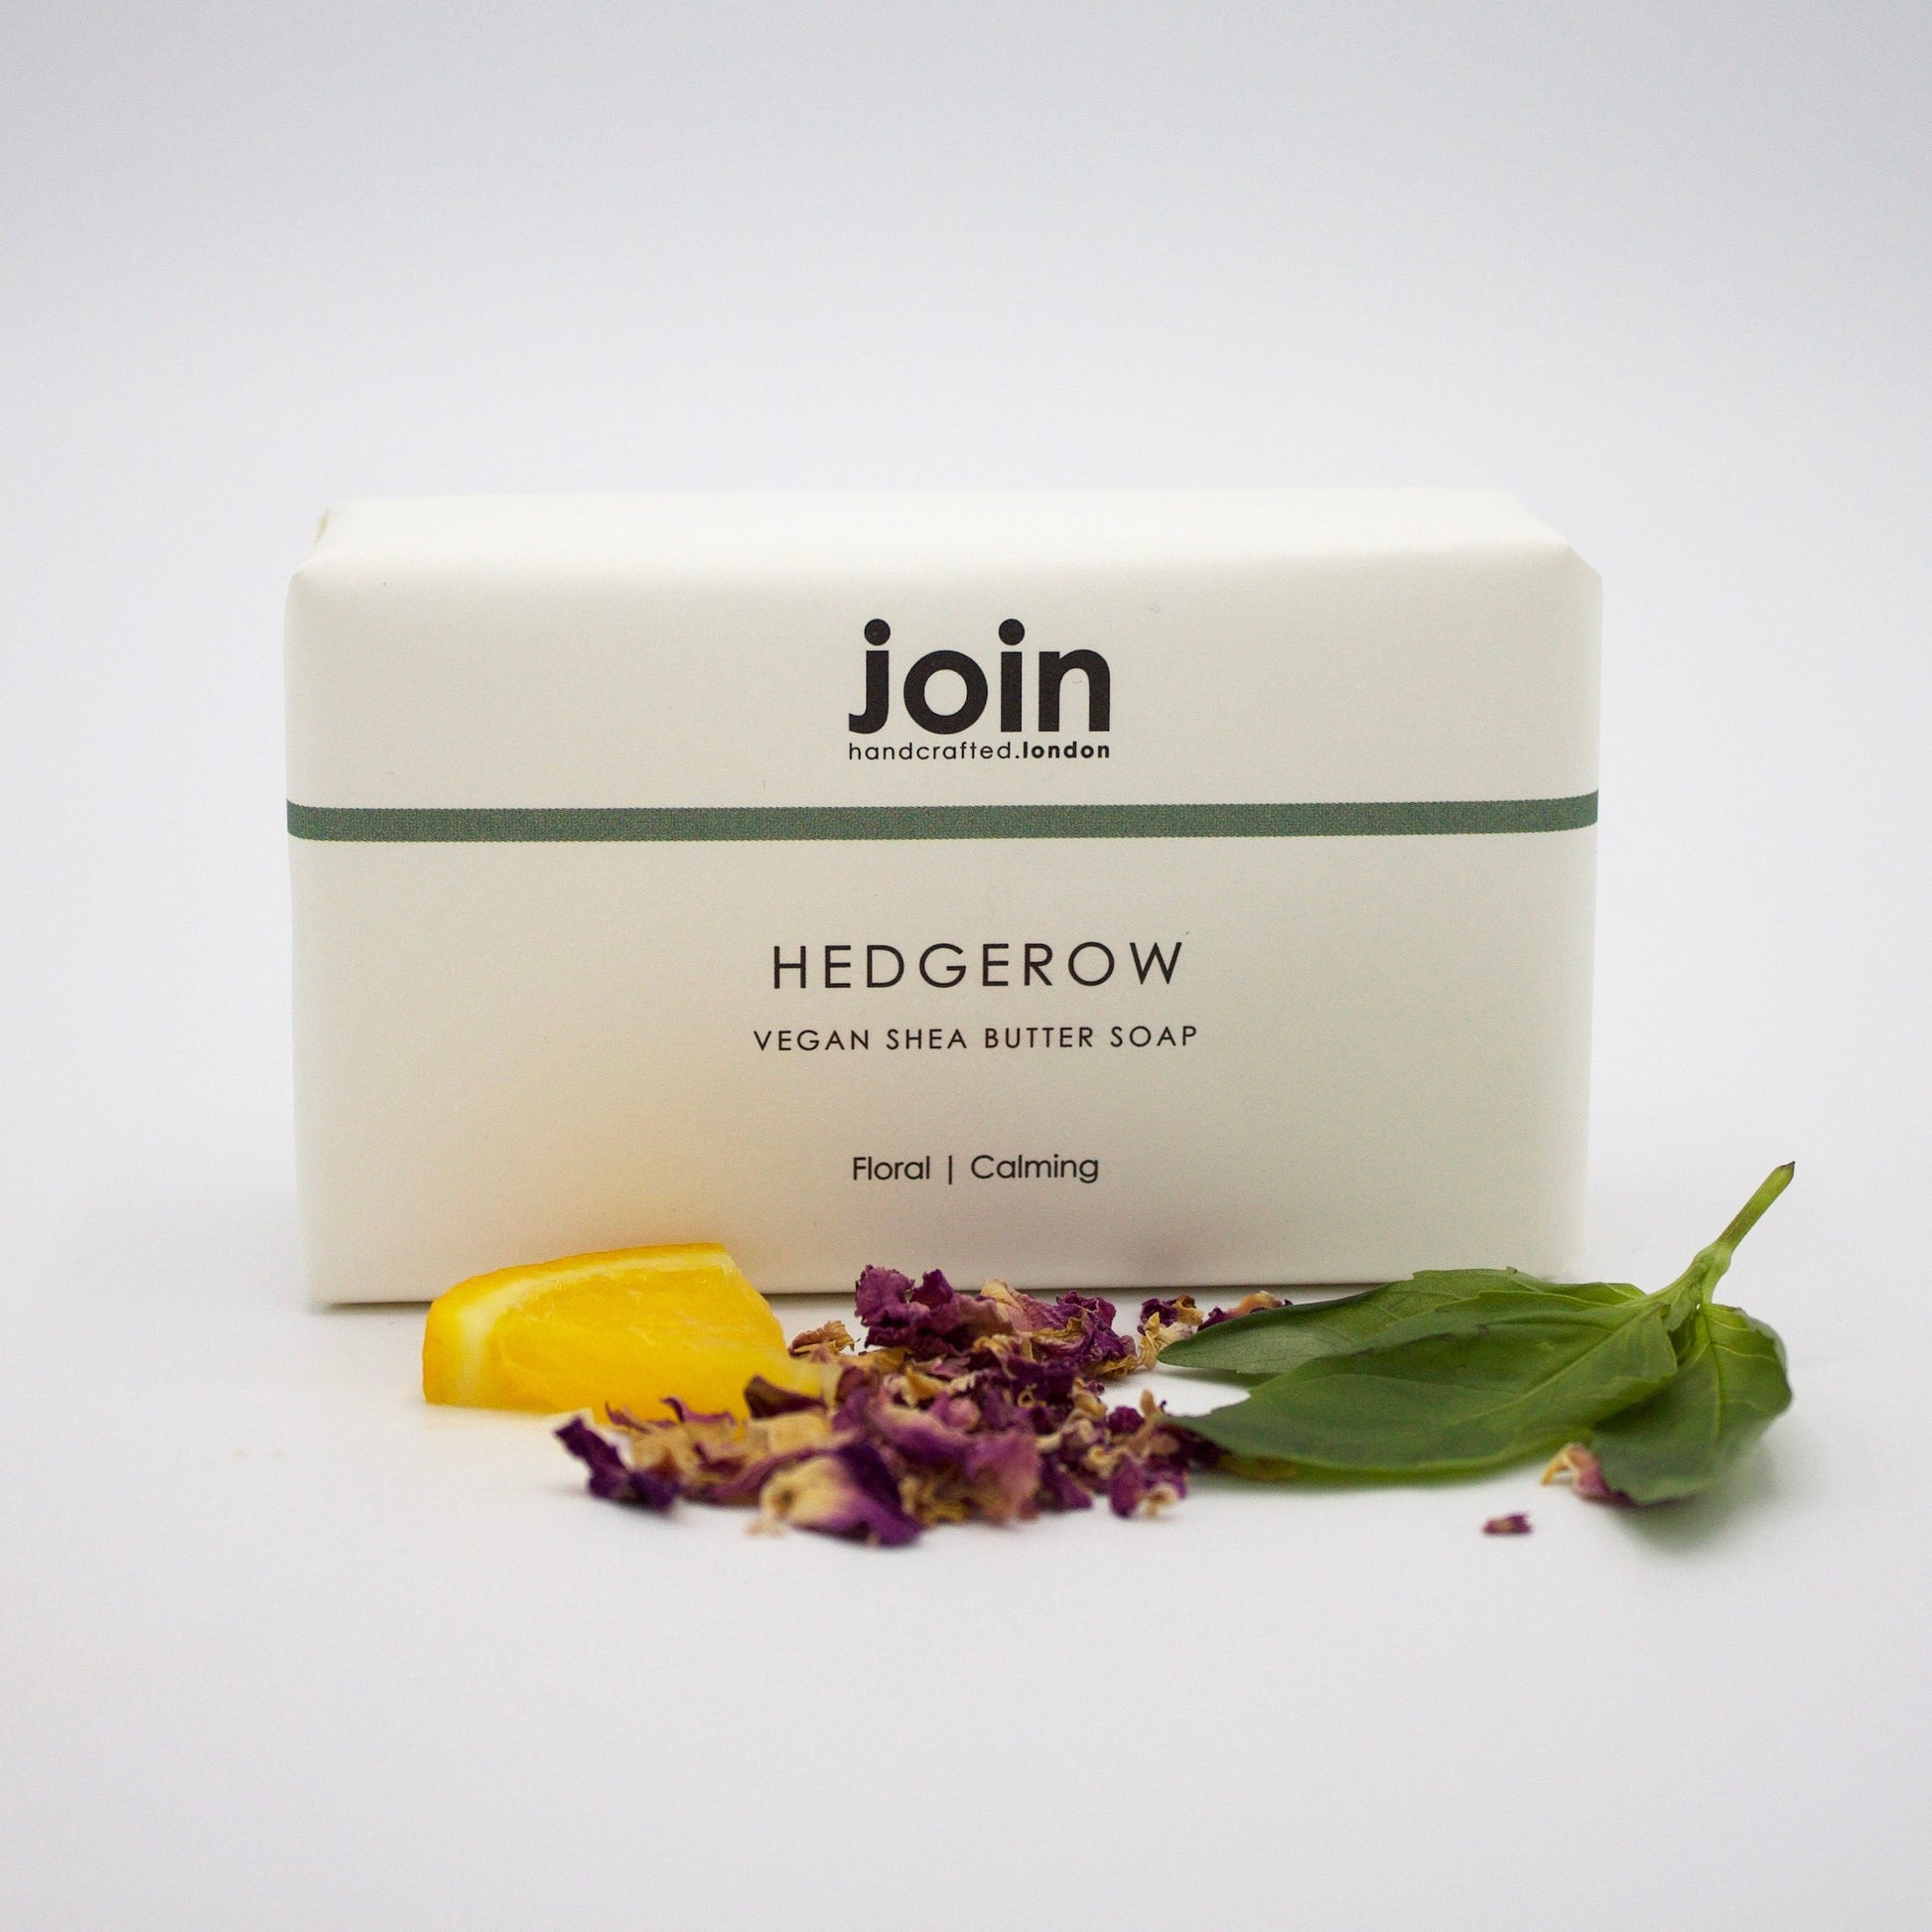 Hedgerow vegan shea butter soap from The Giving Box